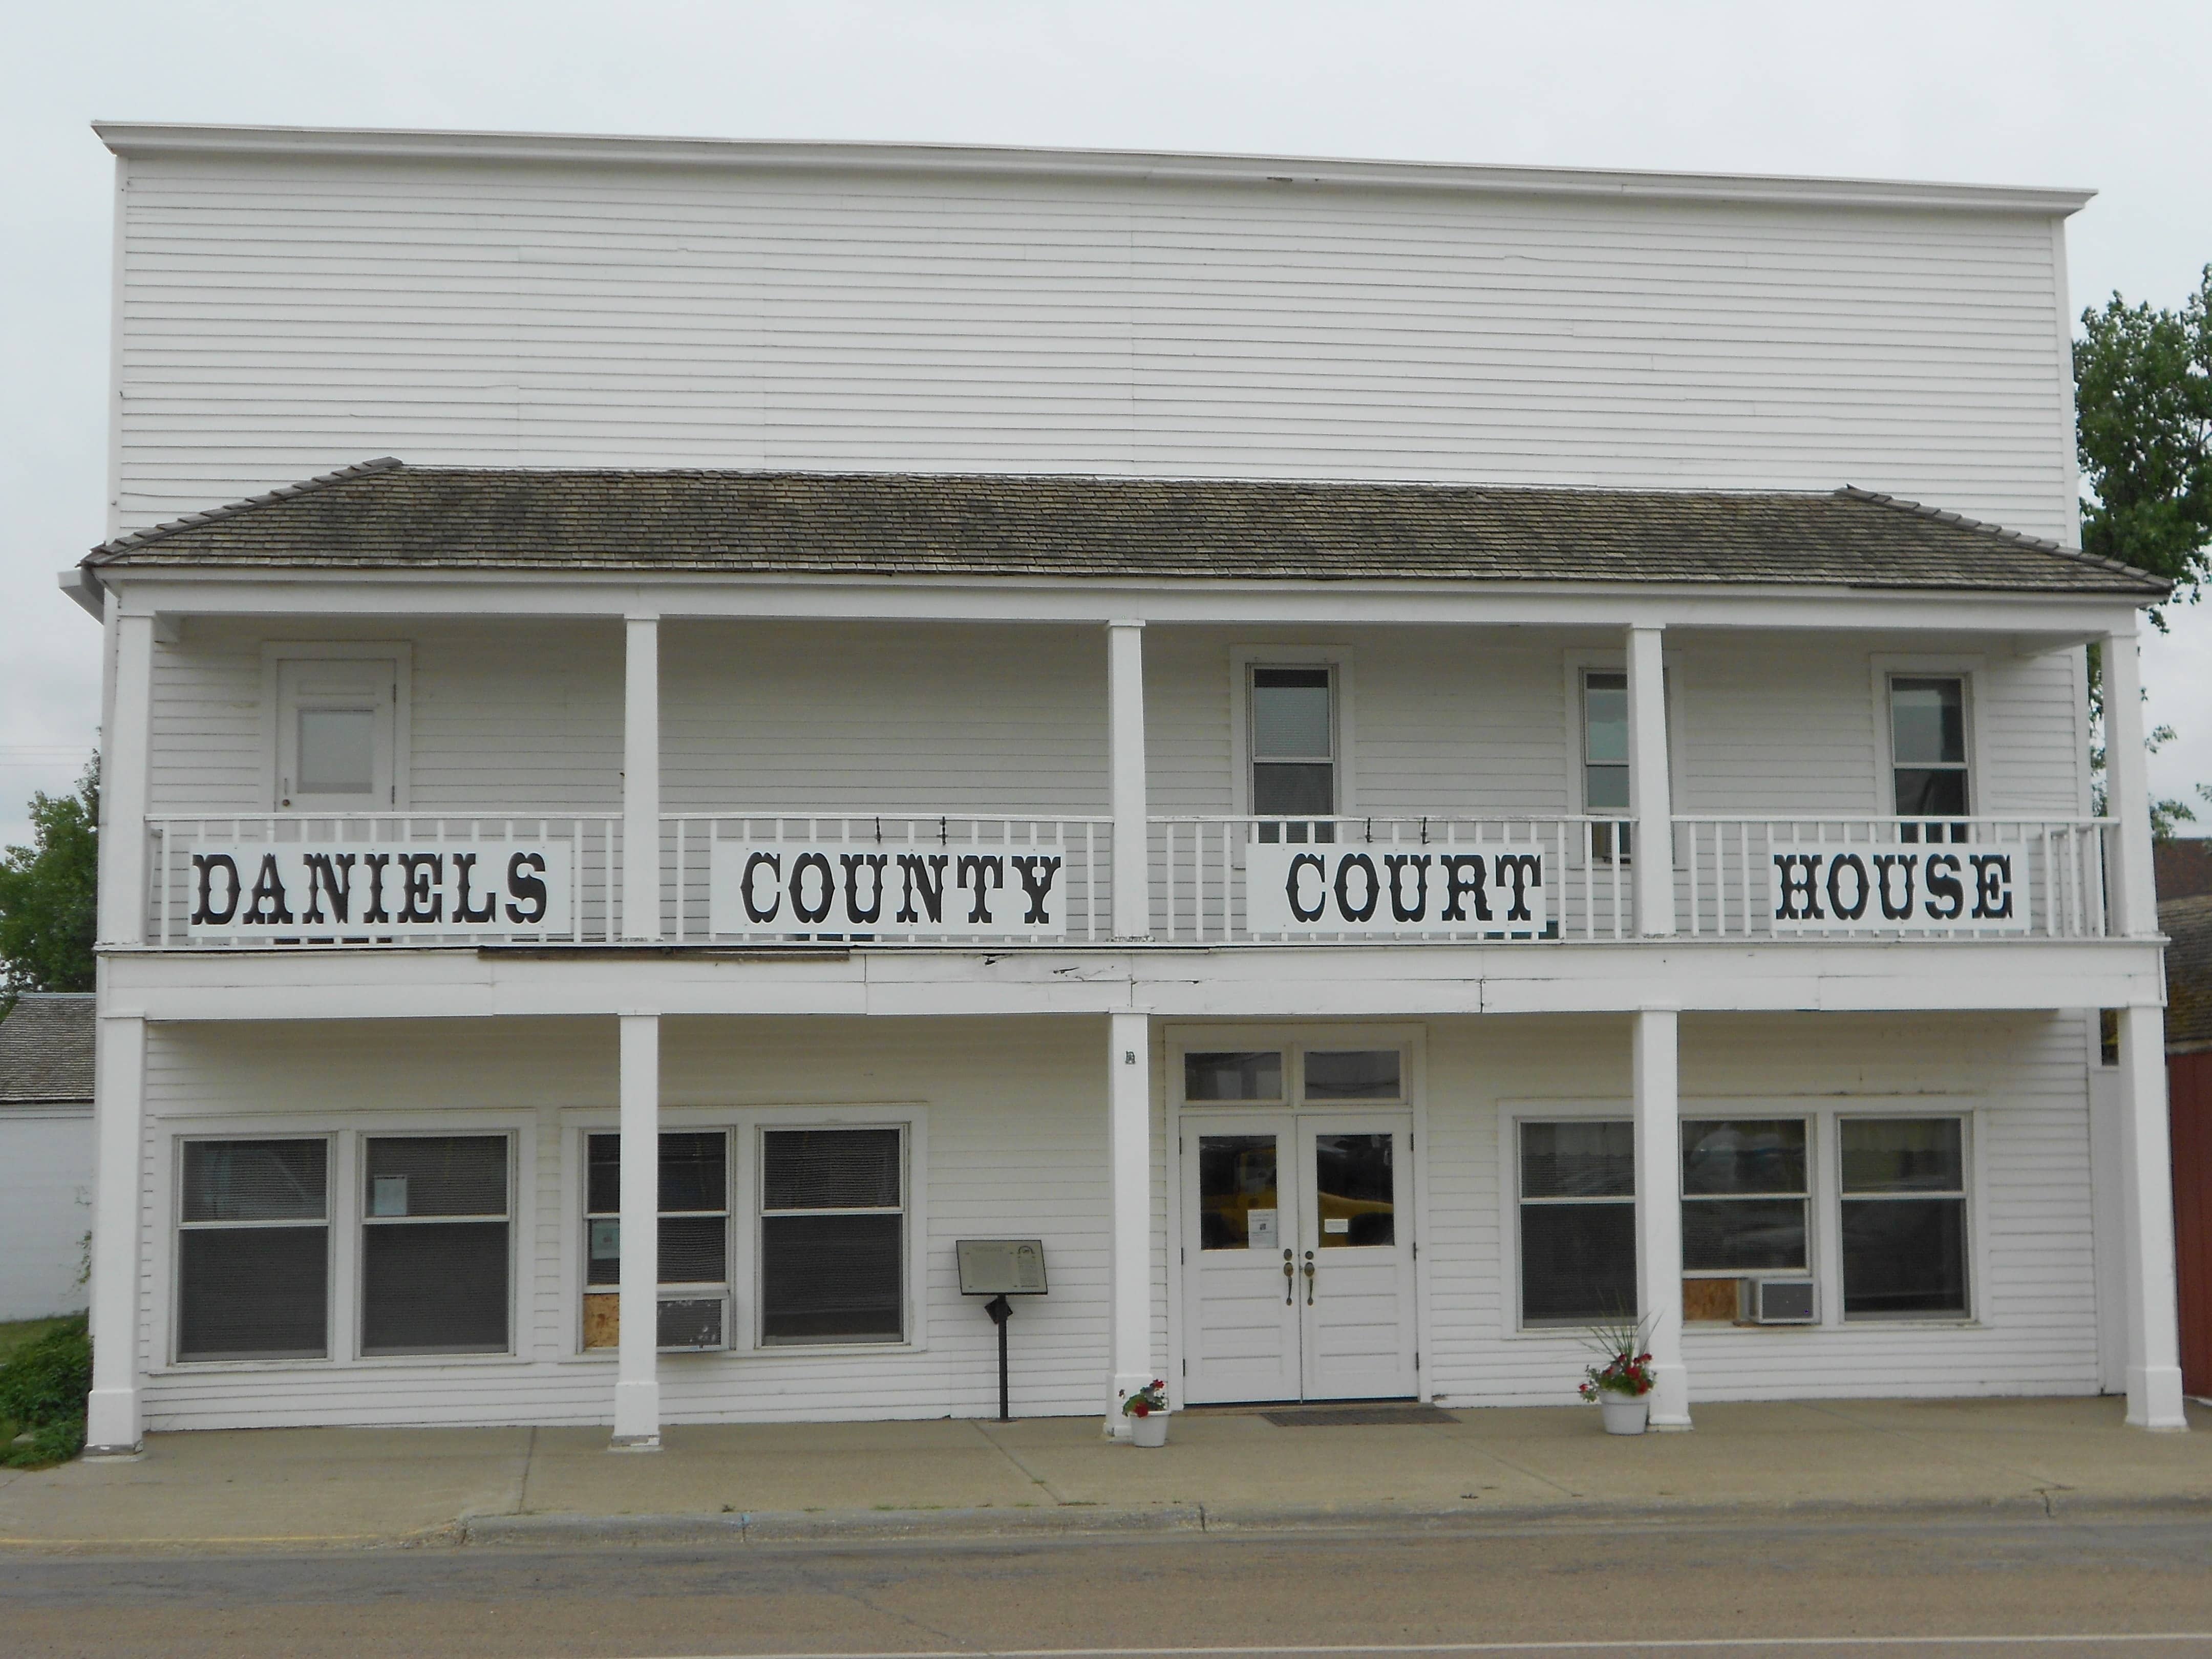 Image of Daniels County Sheriff's Office